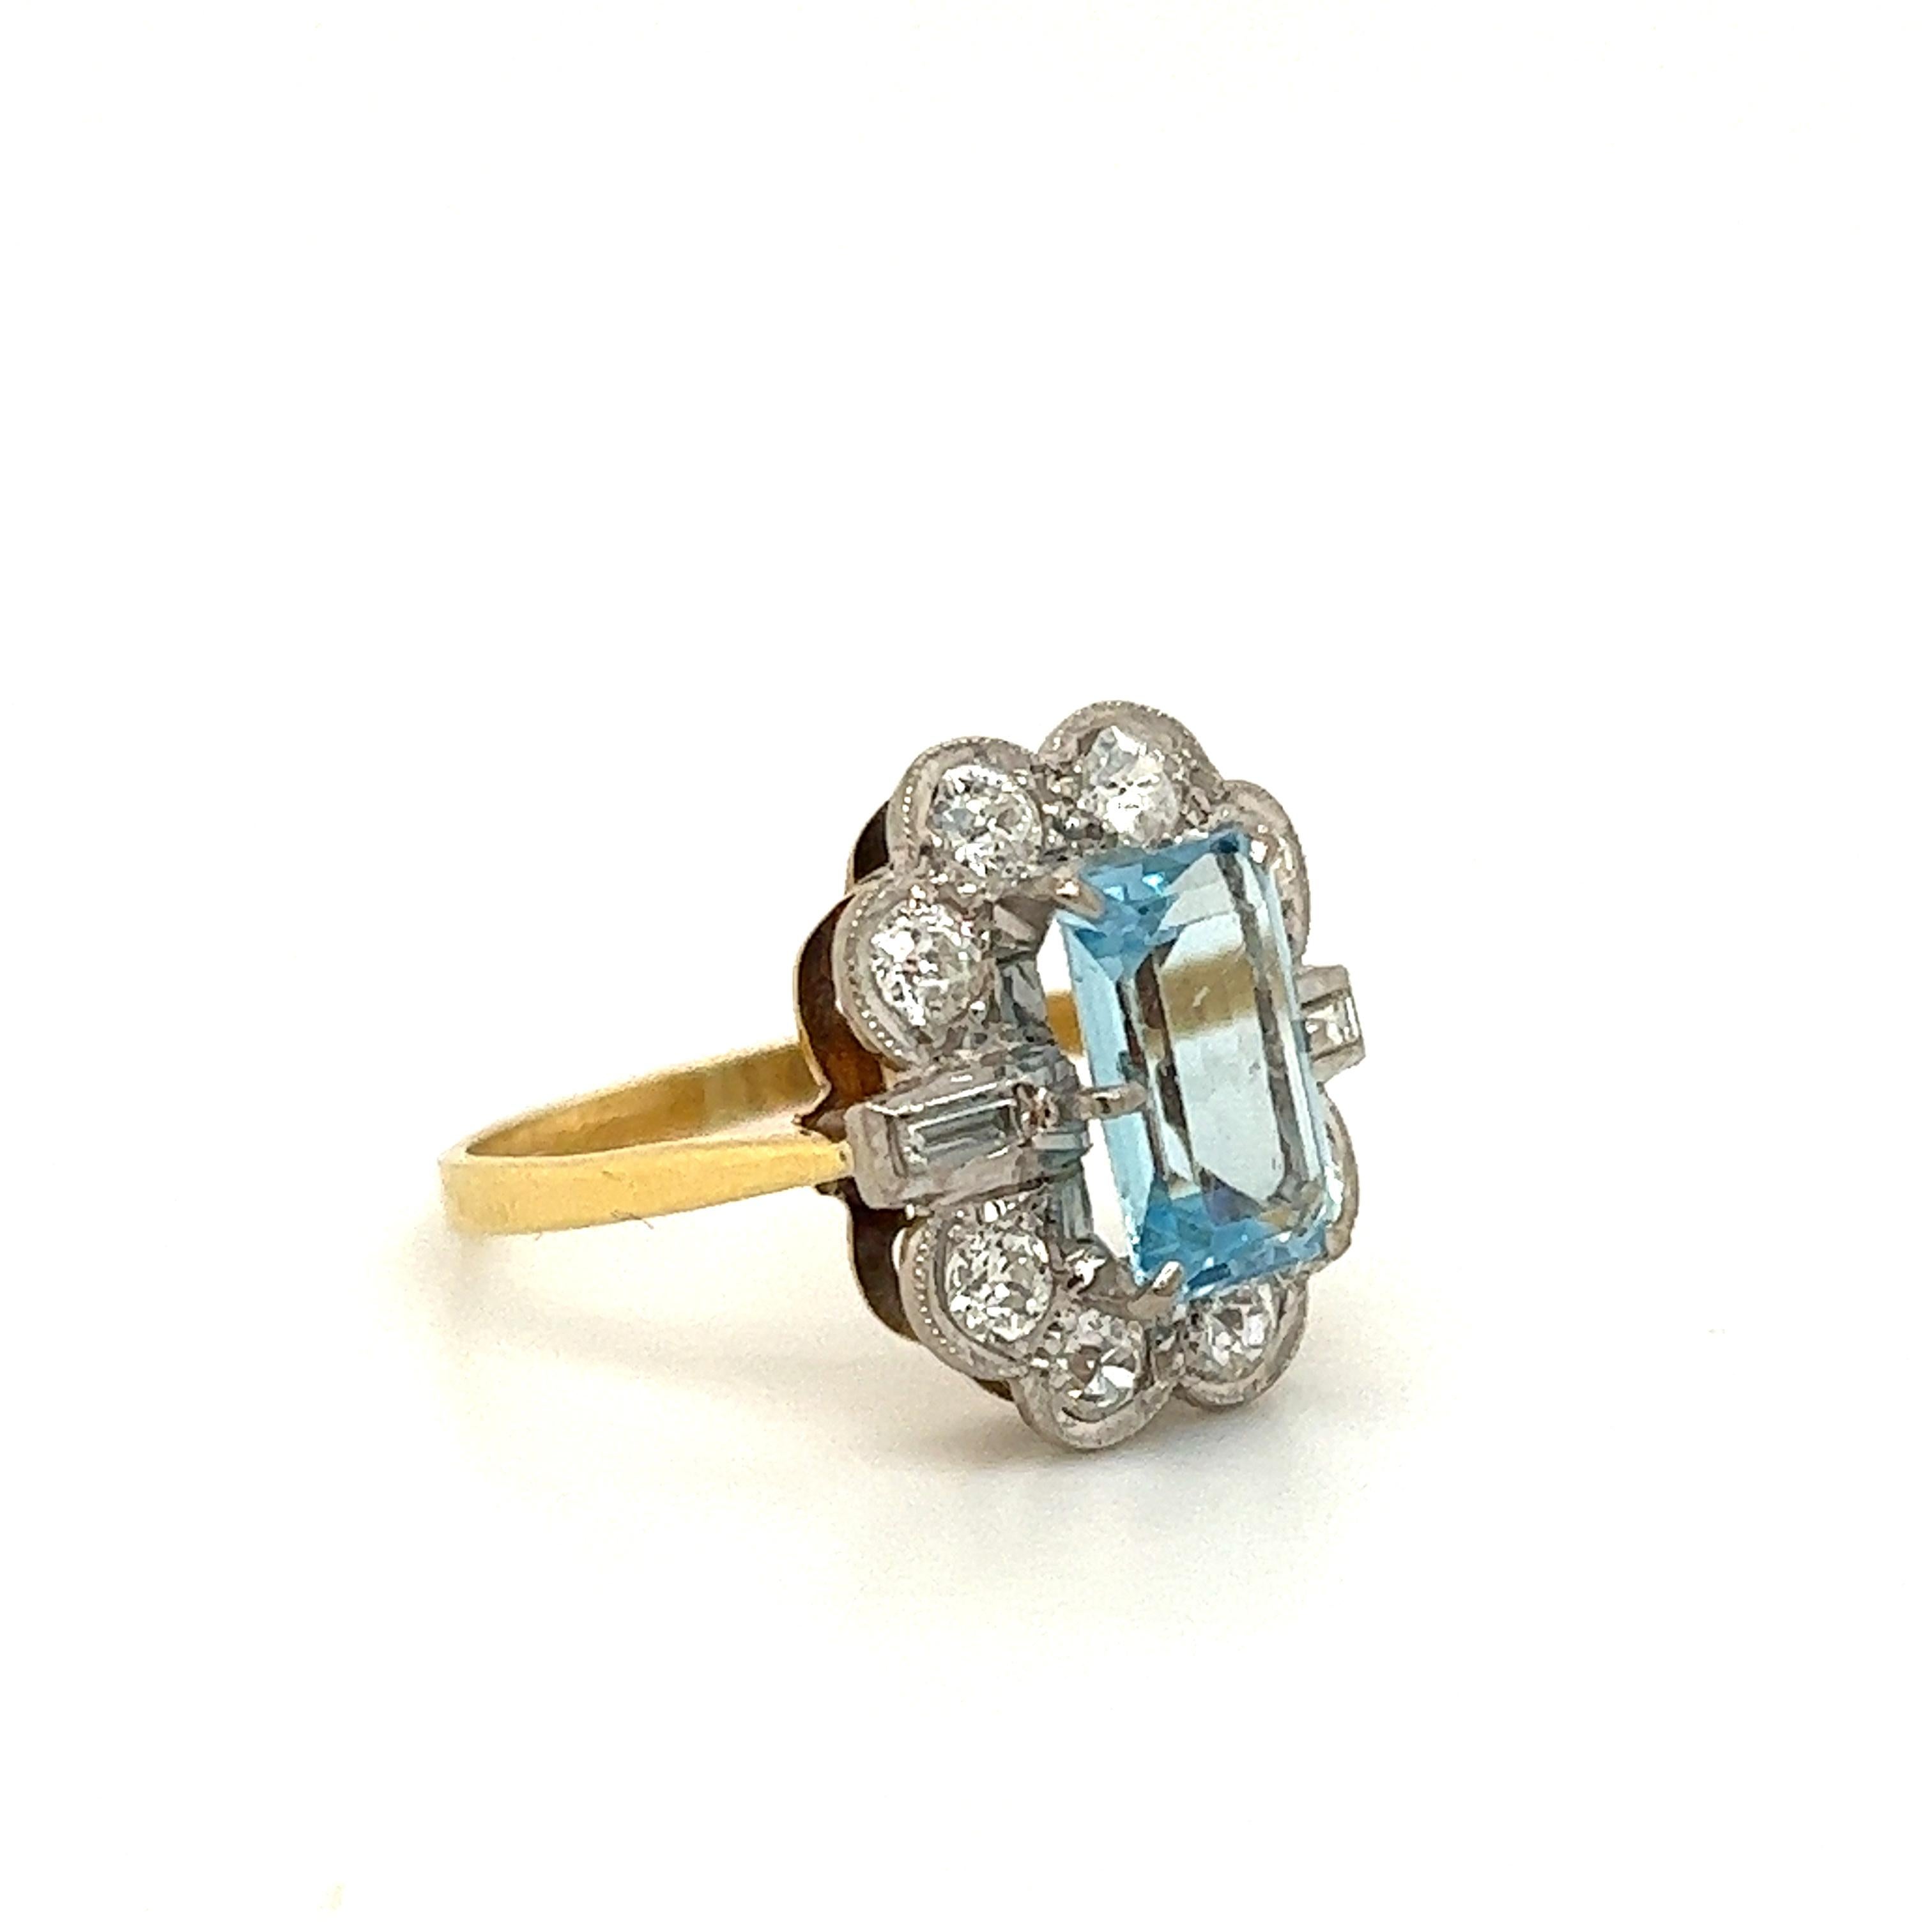 Beautiful design seen on this Victorian treasure. The ring is crafted in platinum and yellow gold. The highlight of the ring is the top half of the design which is set with an aqua marine gemstone and natural earth mined diamonds.  The aqua marine